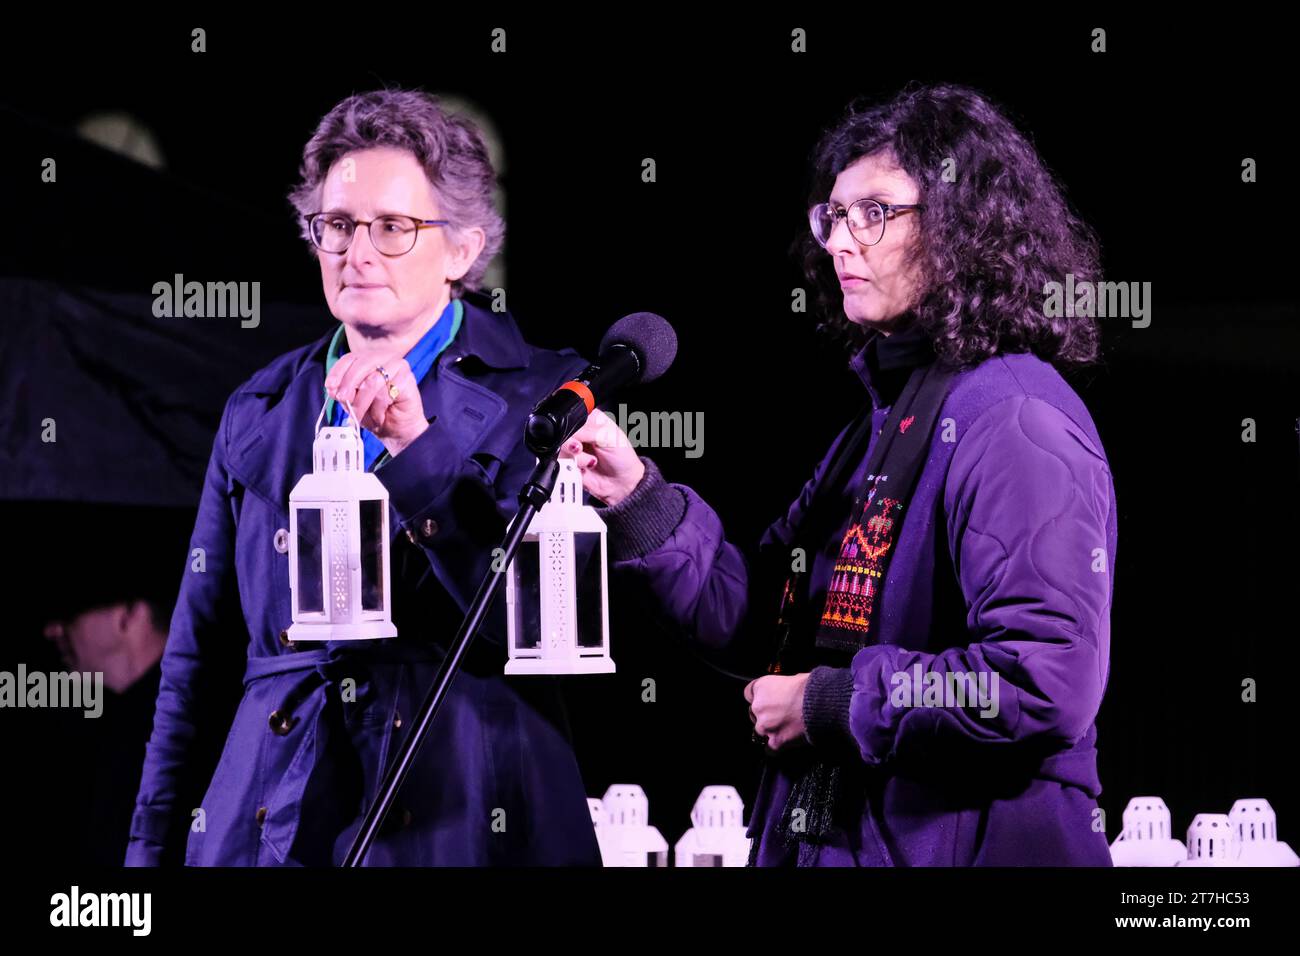 London, UK. 15th November. MPs Flick Drummond and Layla Moran light lanterns in a gesture of peace. Members of the public, MPs, Faith and community leaders took part in the Humanity Not Hatred event opposite Downing Street, to remember all victims of the Israel-Hamas conflict. Credit: Eleventh Hour Photography/Alamy Live News Stock Photo